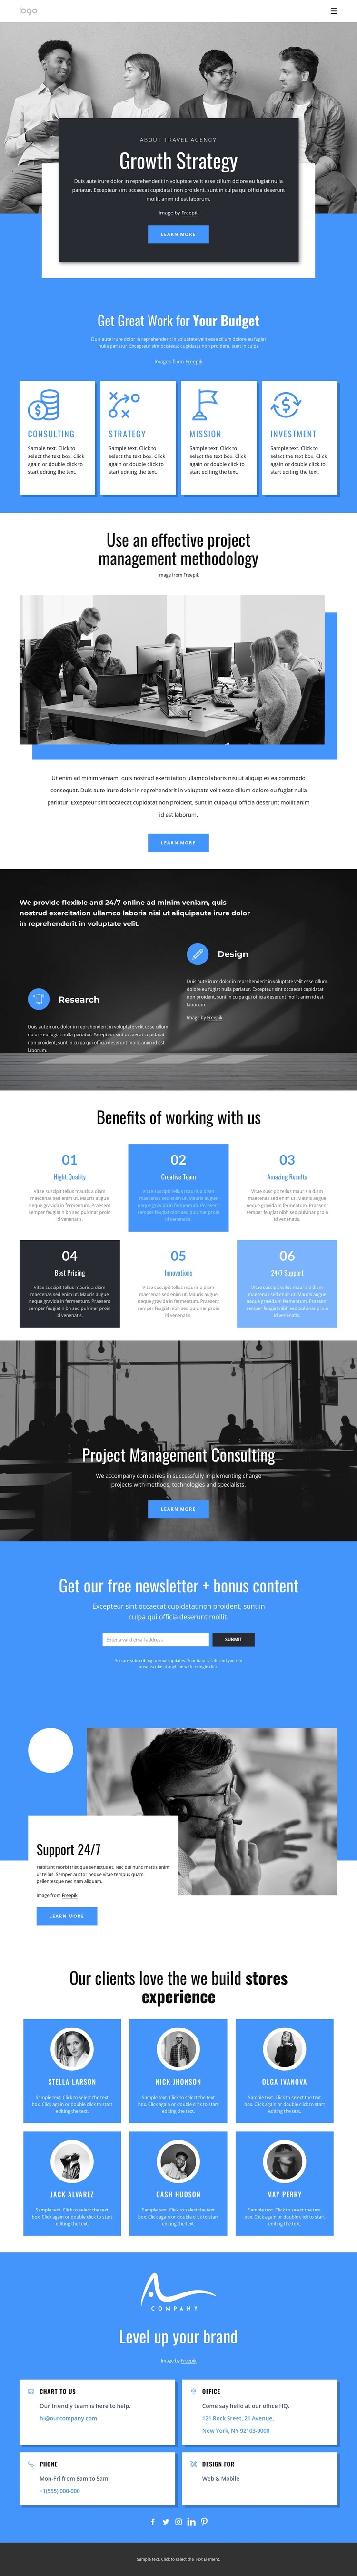 Growth strategy consulting company WordPress Theme